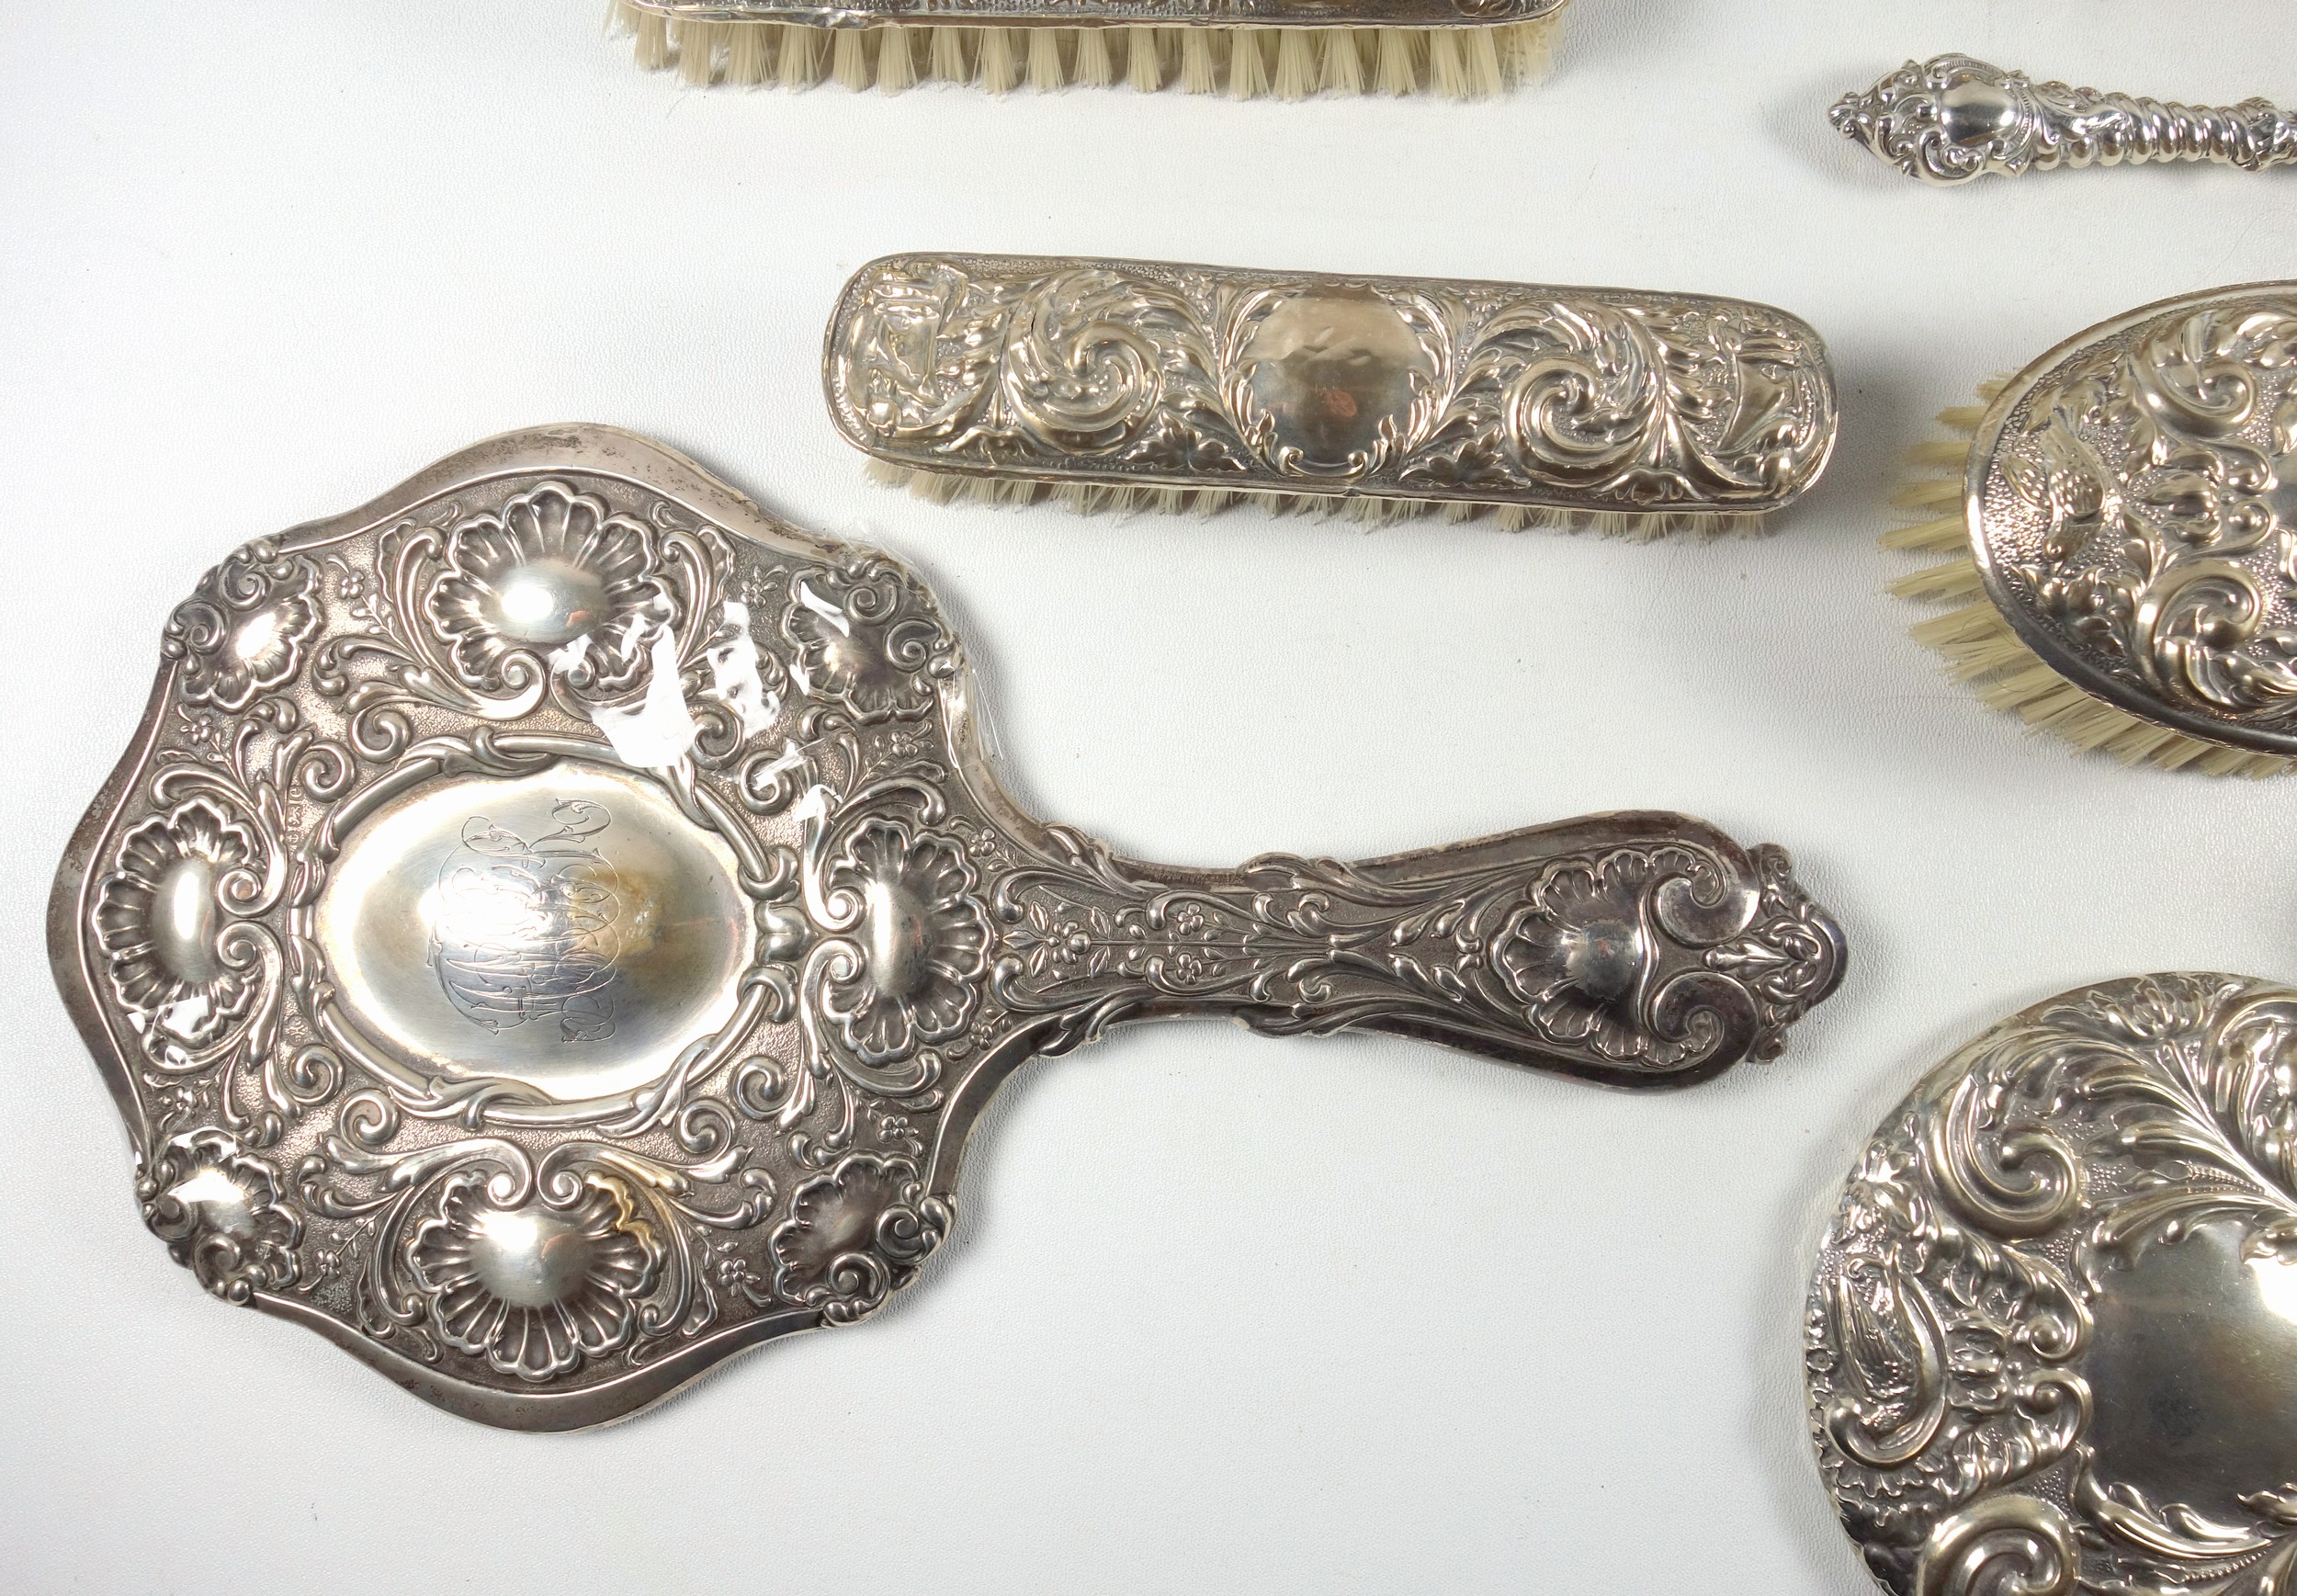 Edwardian 5 piece silver mounted dressing table set with embossed floral decoration and monogram, - Image 3 of 5